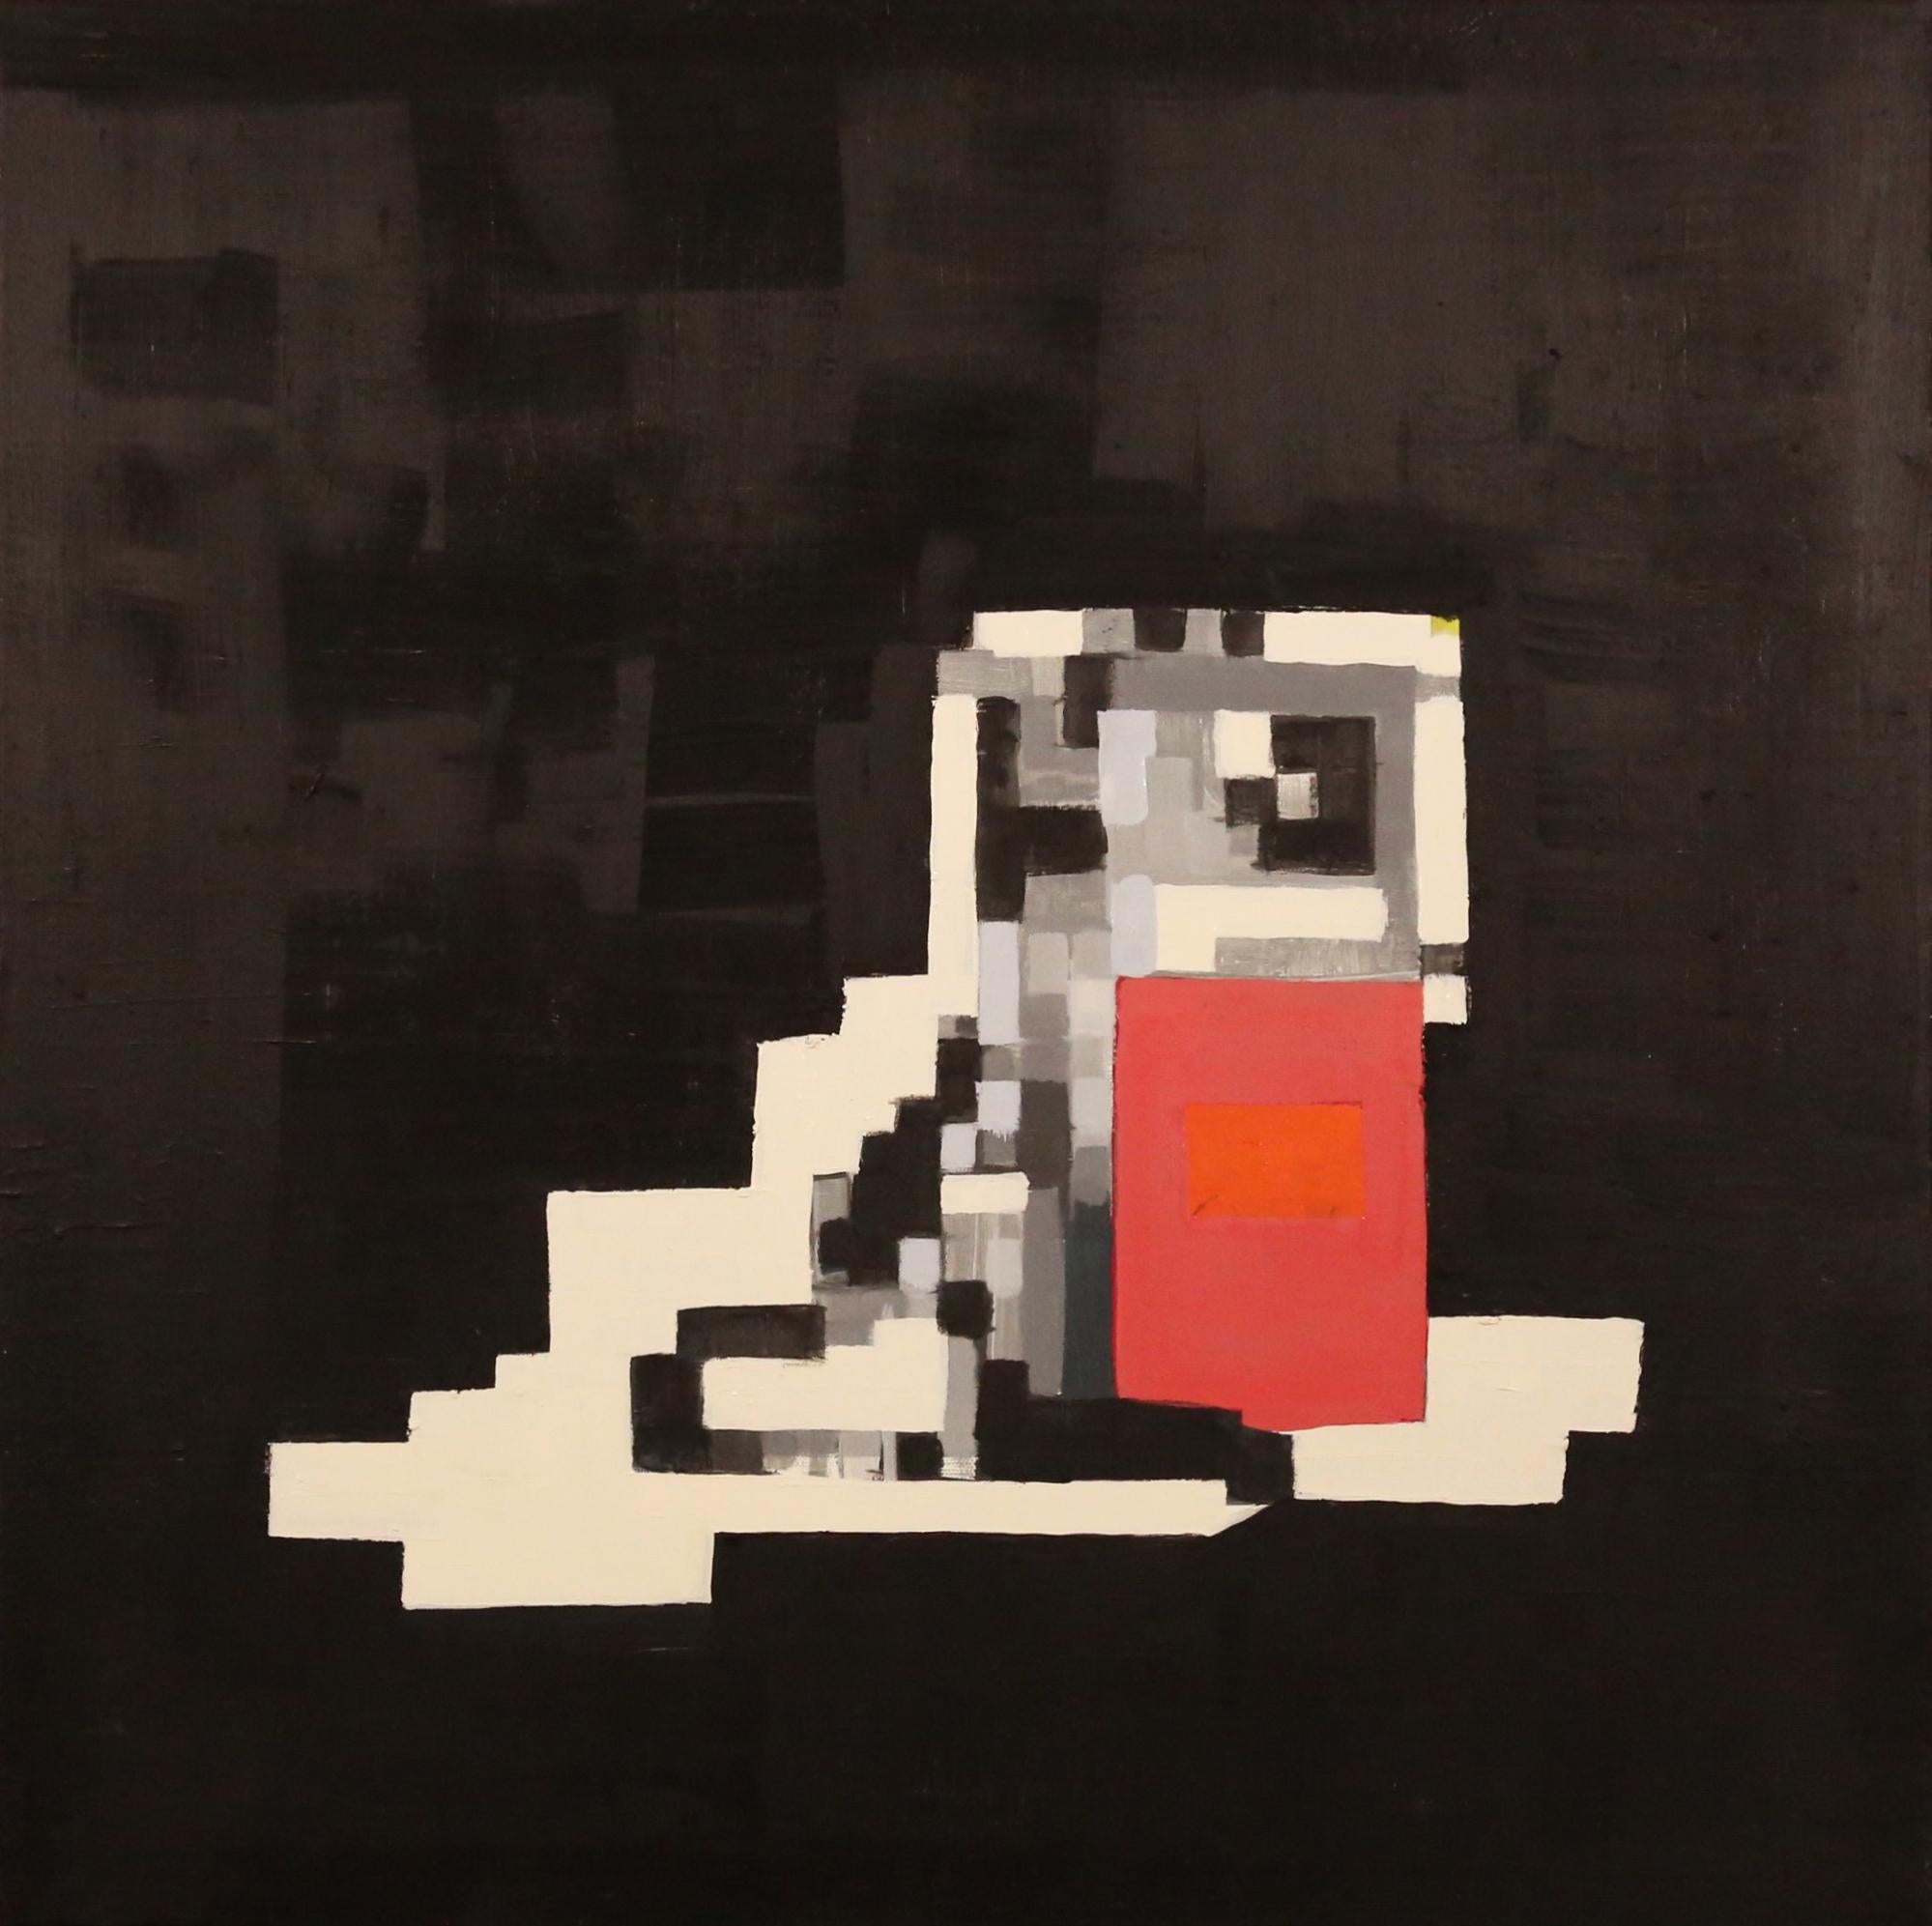 Robert Hightower Abstract Painting - 'The Pump' - Contemporary Geometric Abstraction - Pixelation - Bosch